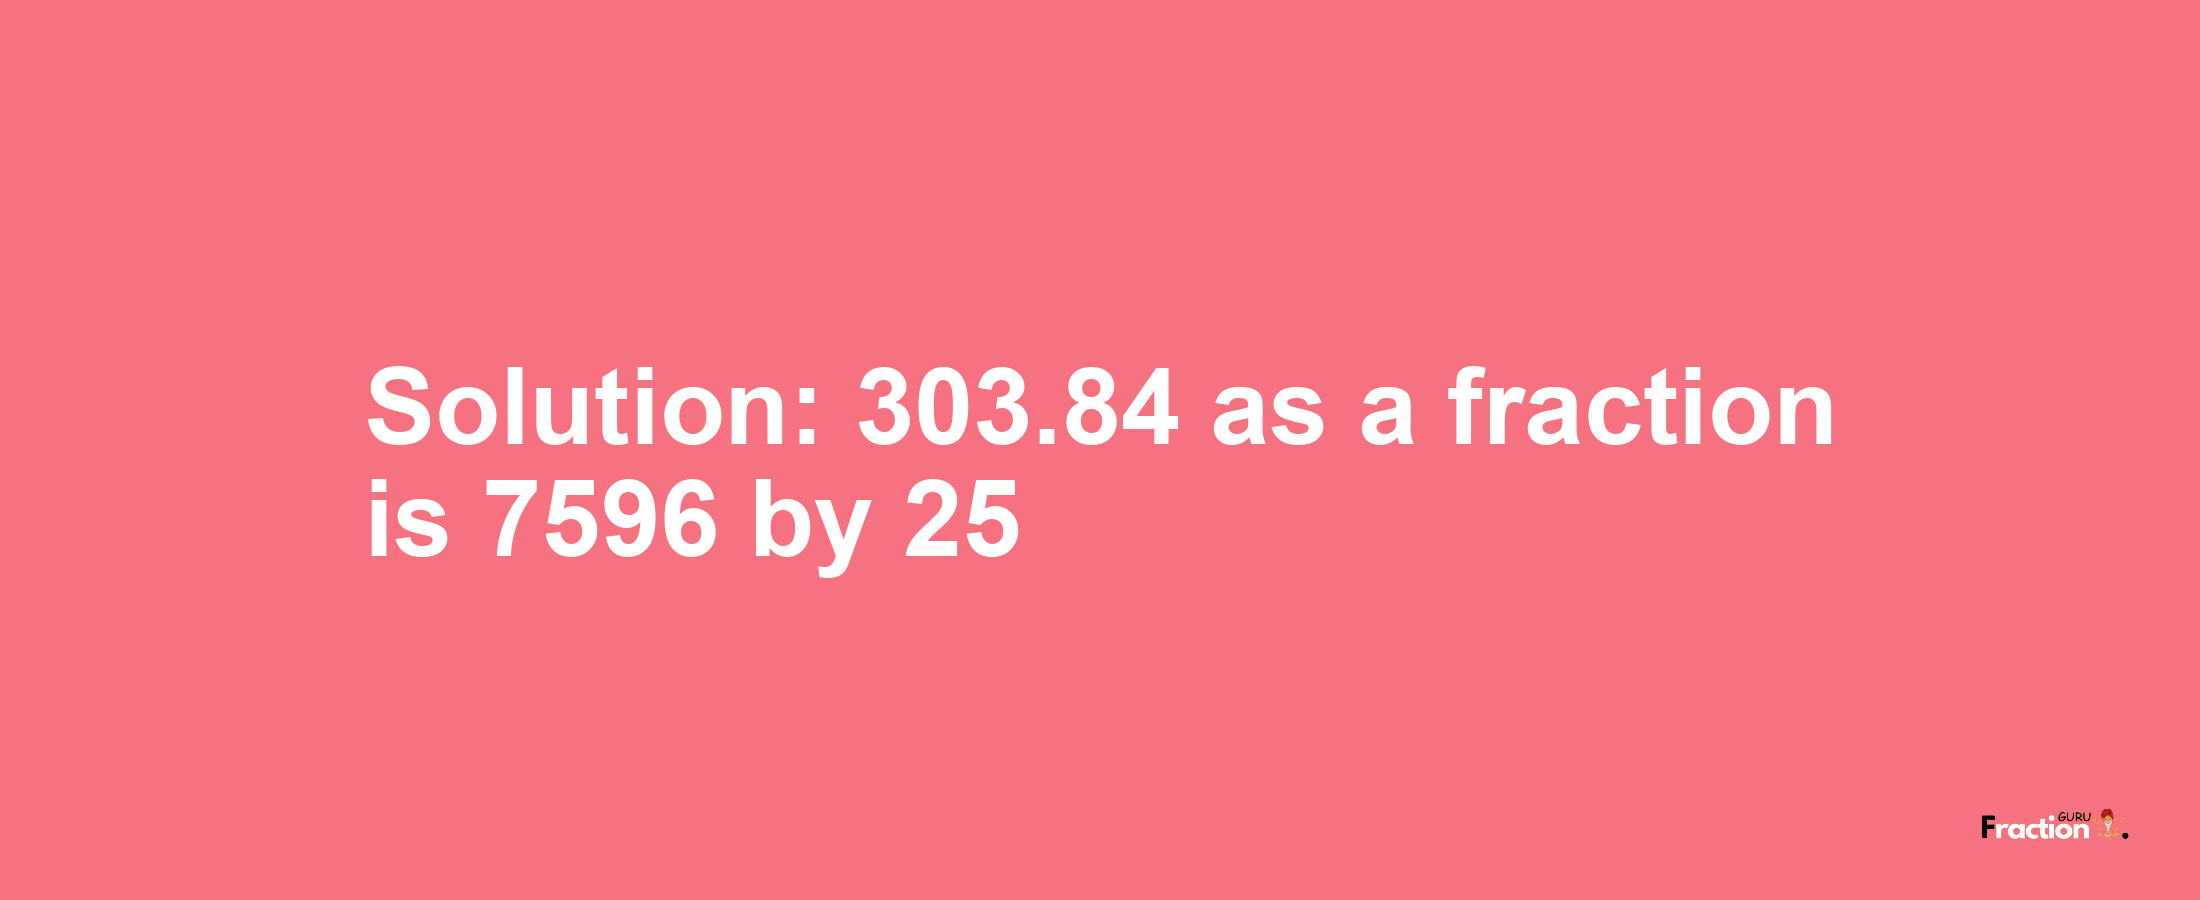 Solution:303.84 as a fraction is 7596/25